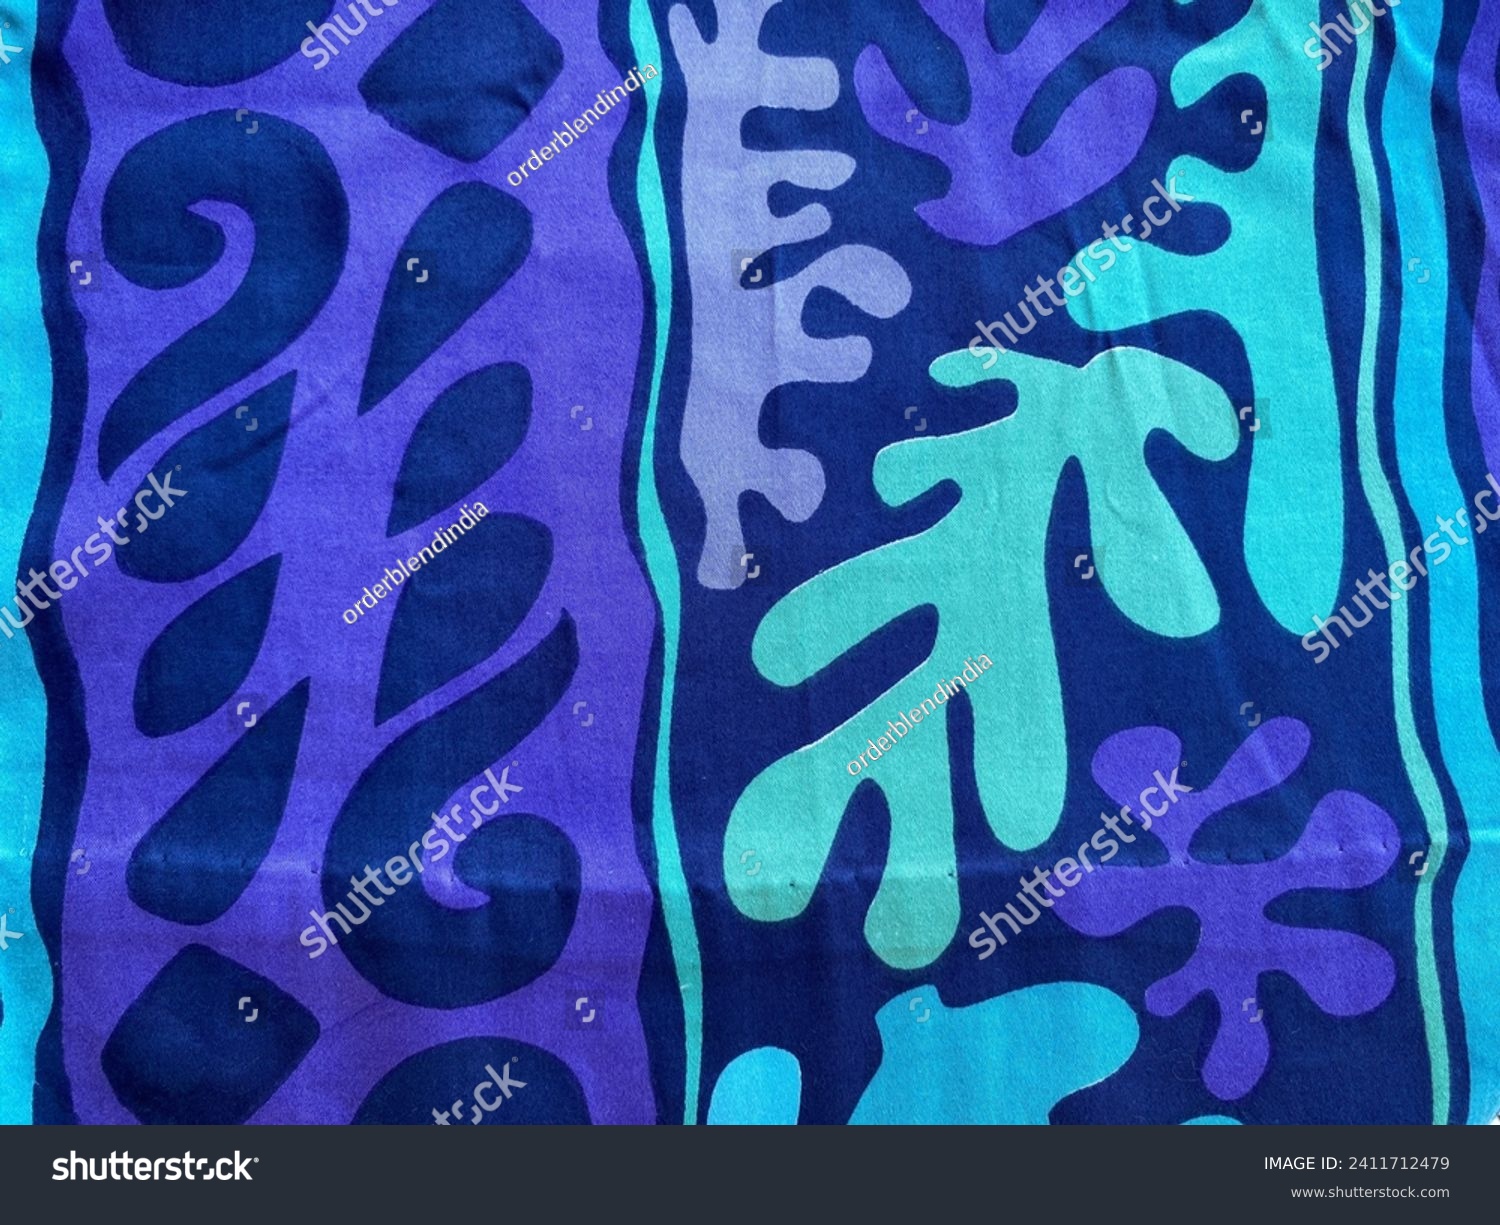 Light dark and blue abstract design digital printed on Lycra fabric  #2411712479